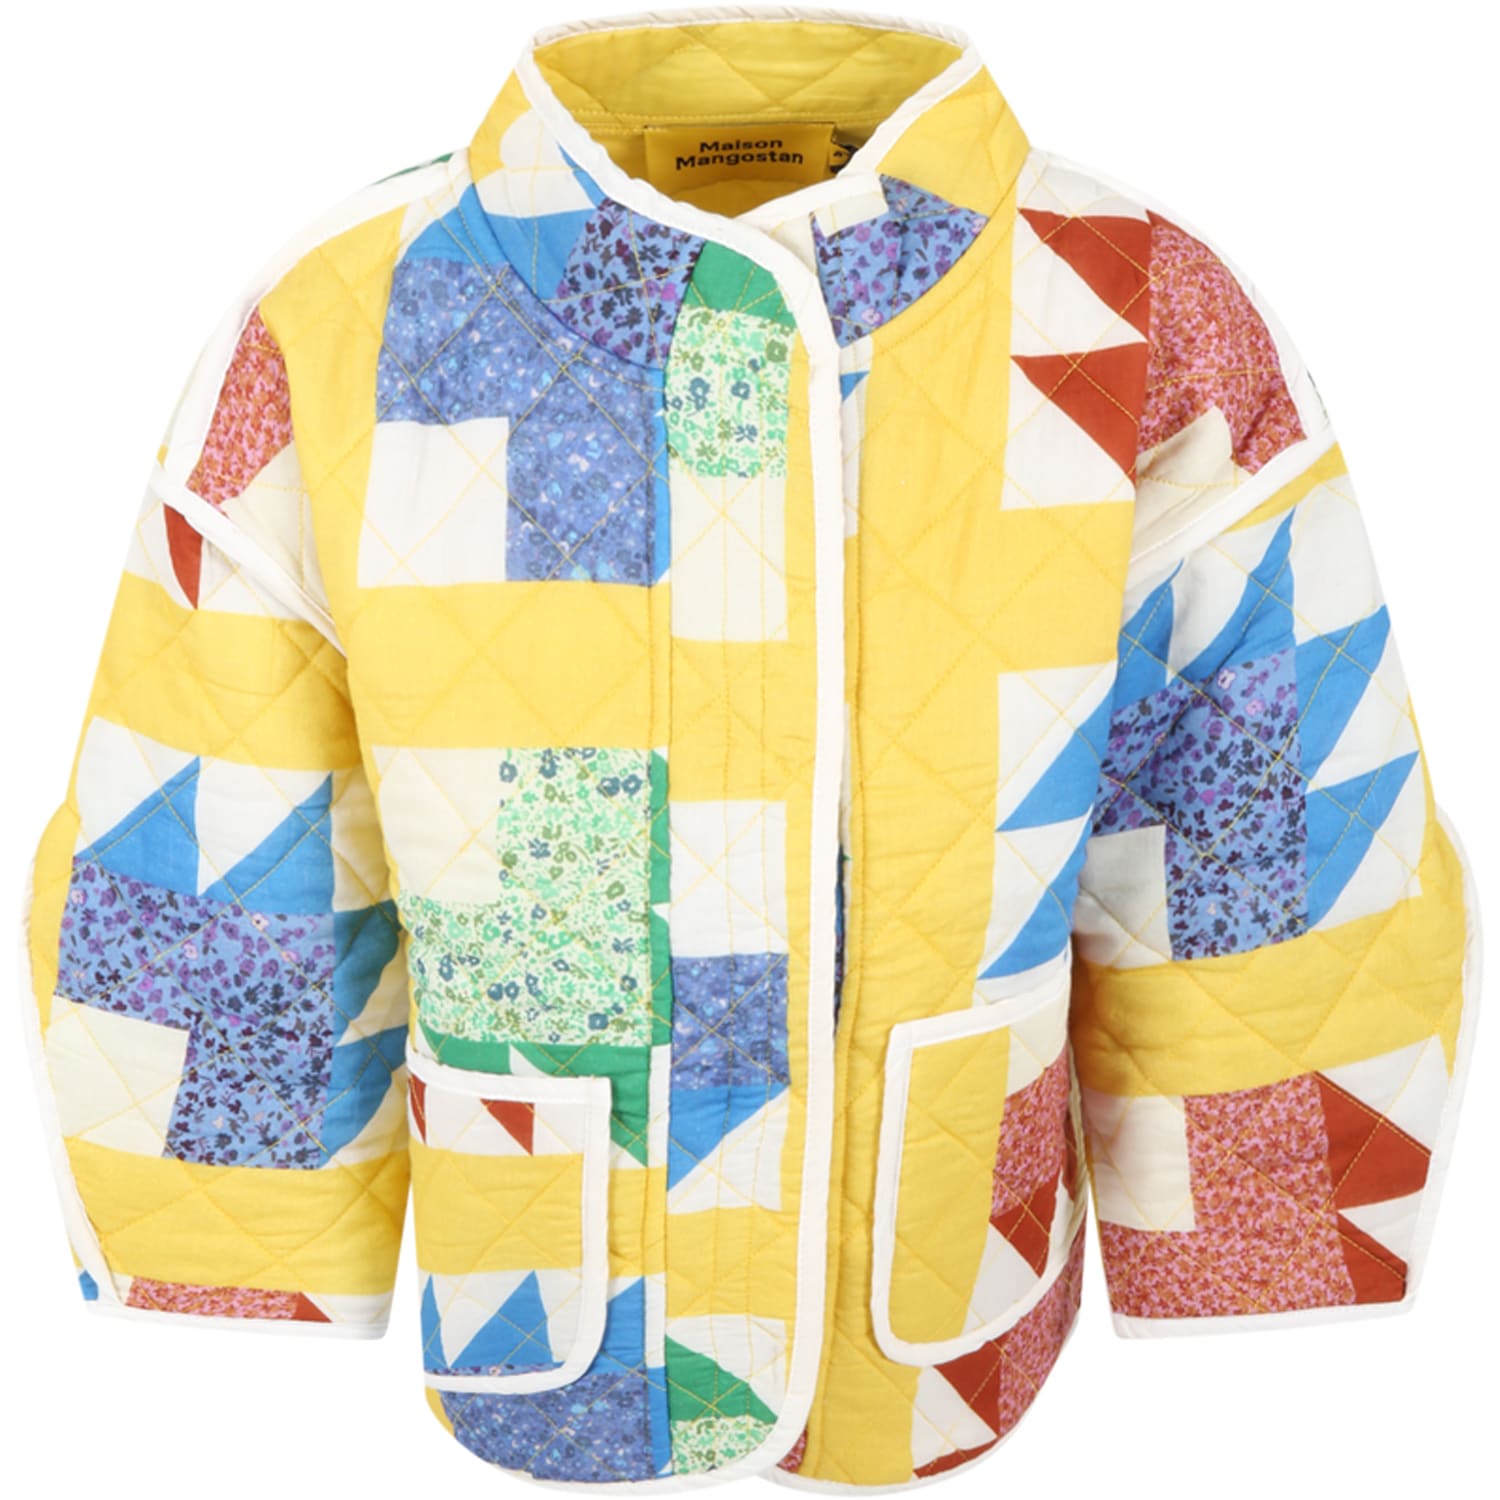 MAISON MANGOSTAN YELLOW JACKET FOR GIRL WITH COLORFUL DETAILS